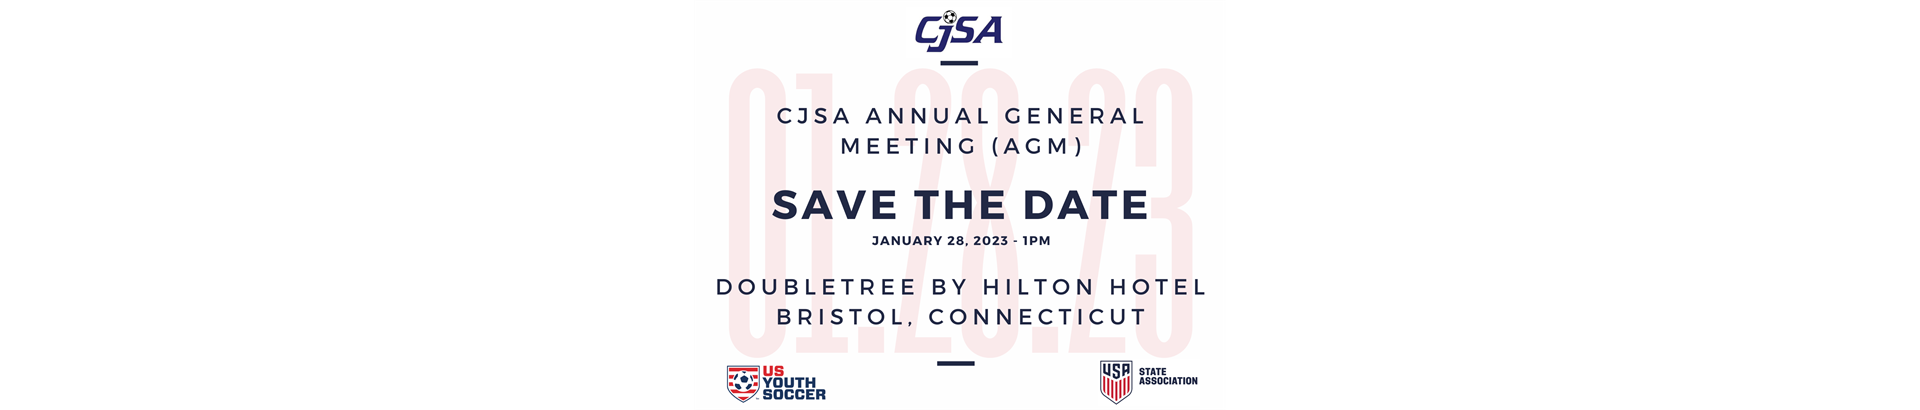 SAVE THE DATE - AGM